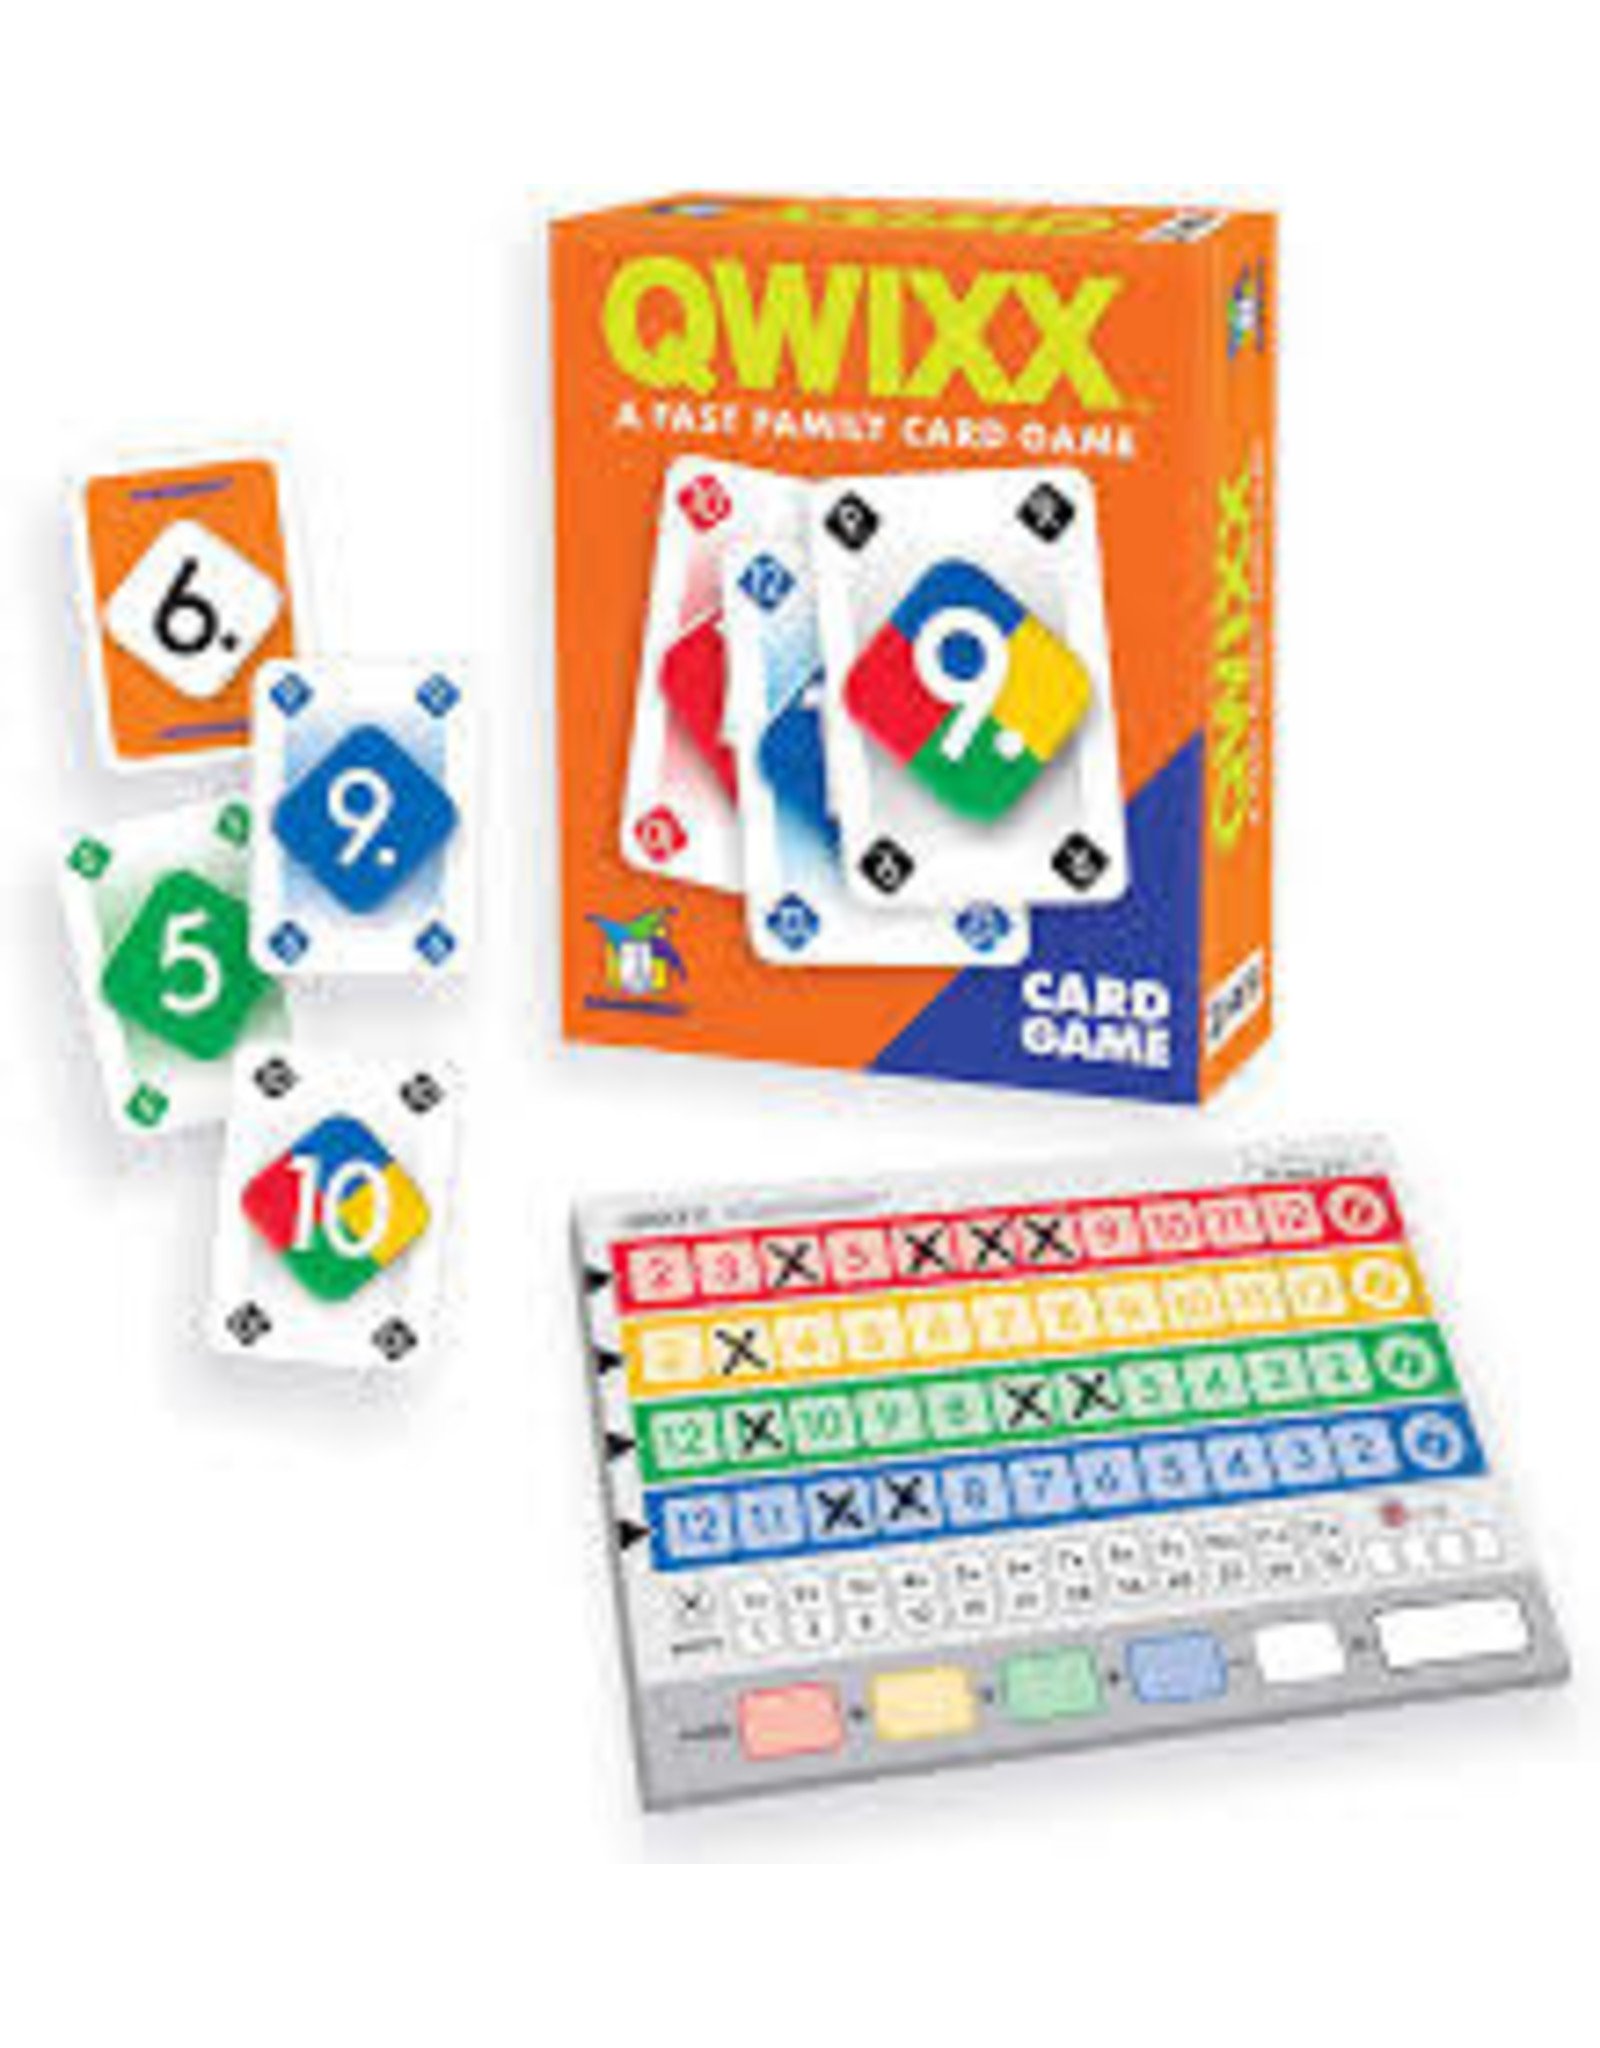 Gamewright qwixx cardgame 257 gamewright